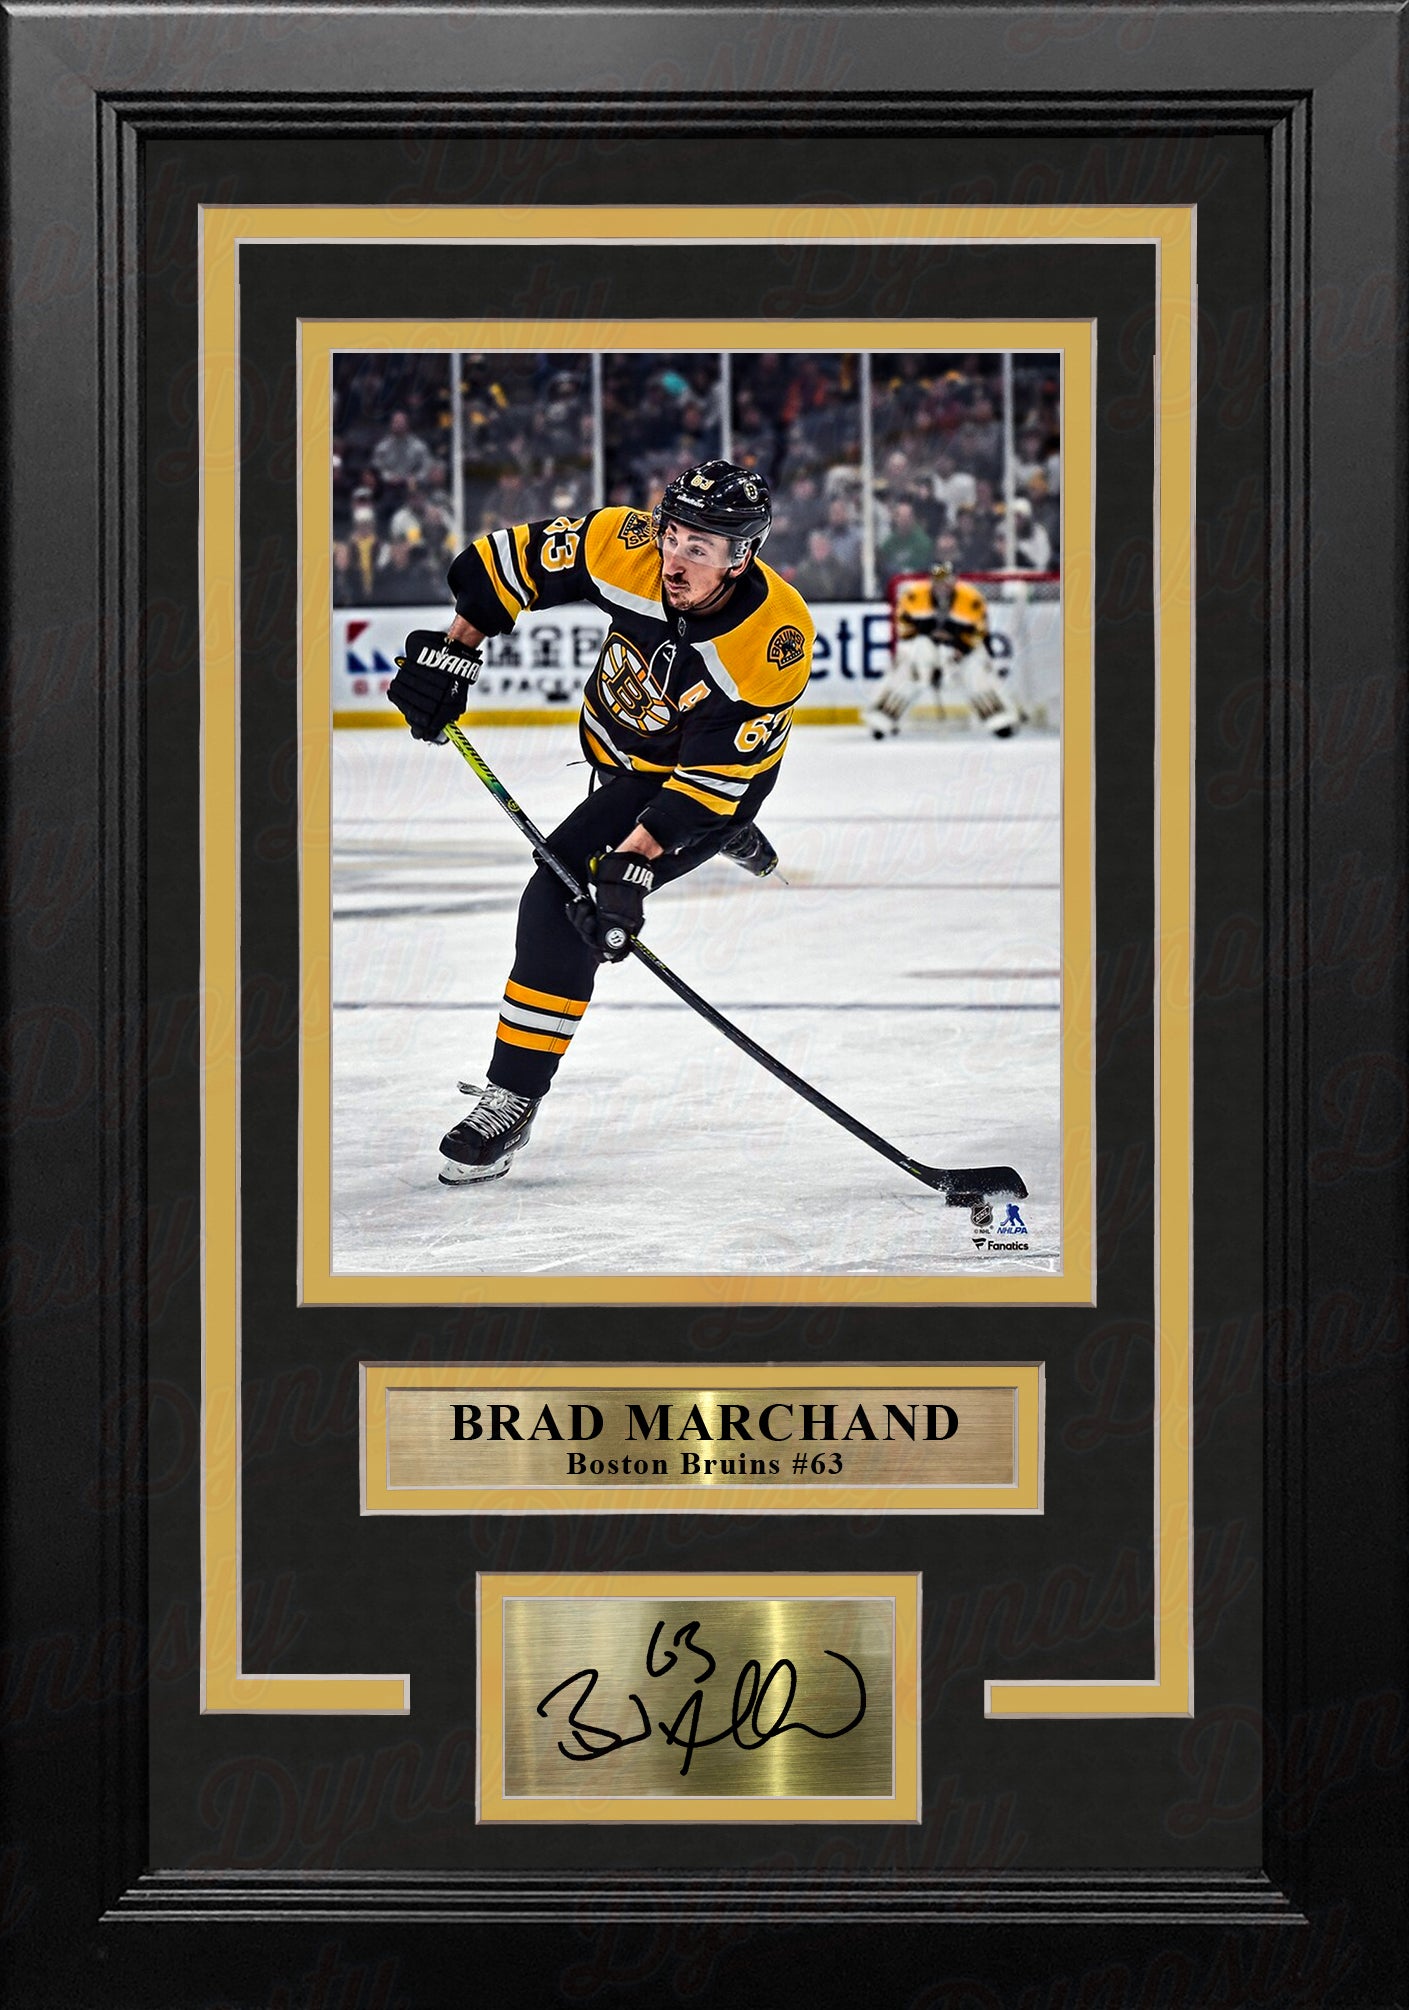 Brad Marchand in Action Boston Bruins 8" x 10" Framed Hockey Photo with Engraved Autograph - Dynasty Sports & Framing 